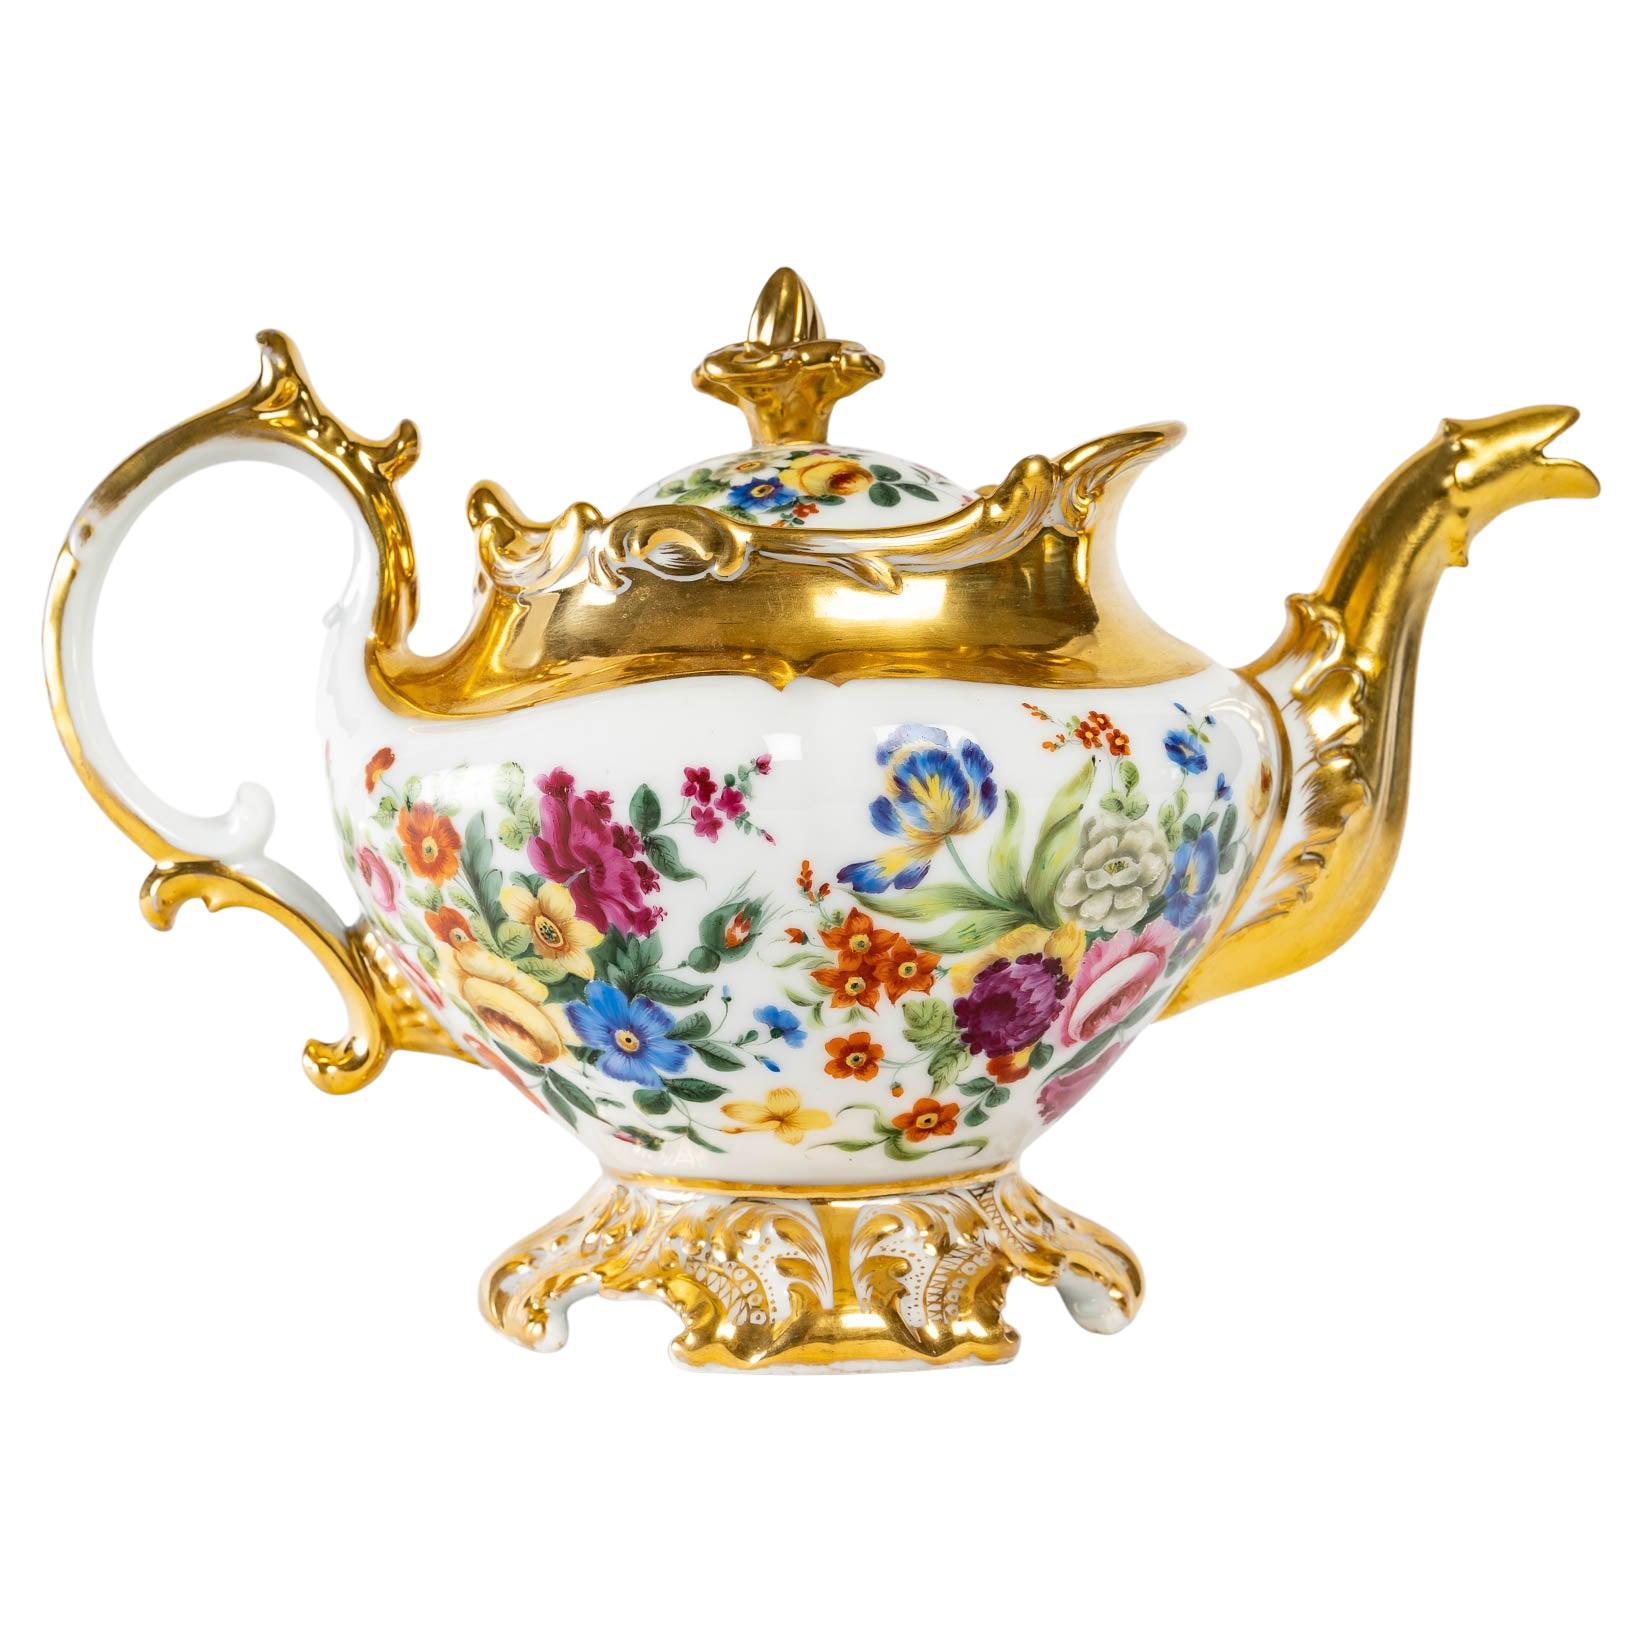 How can I tell if my teapot is antique?